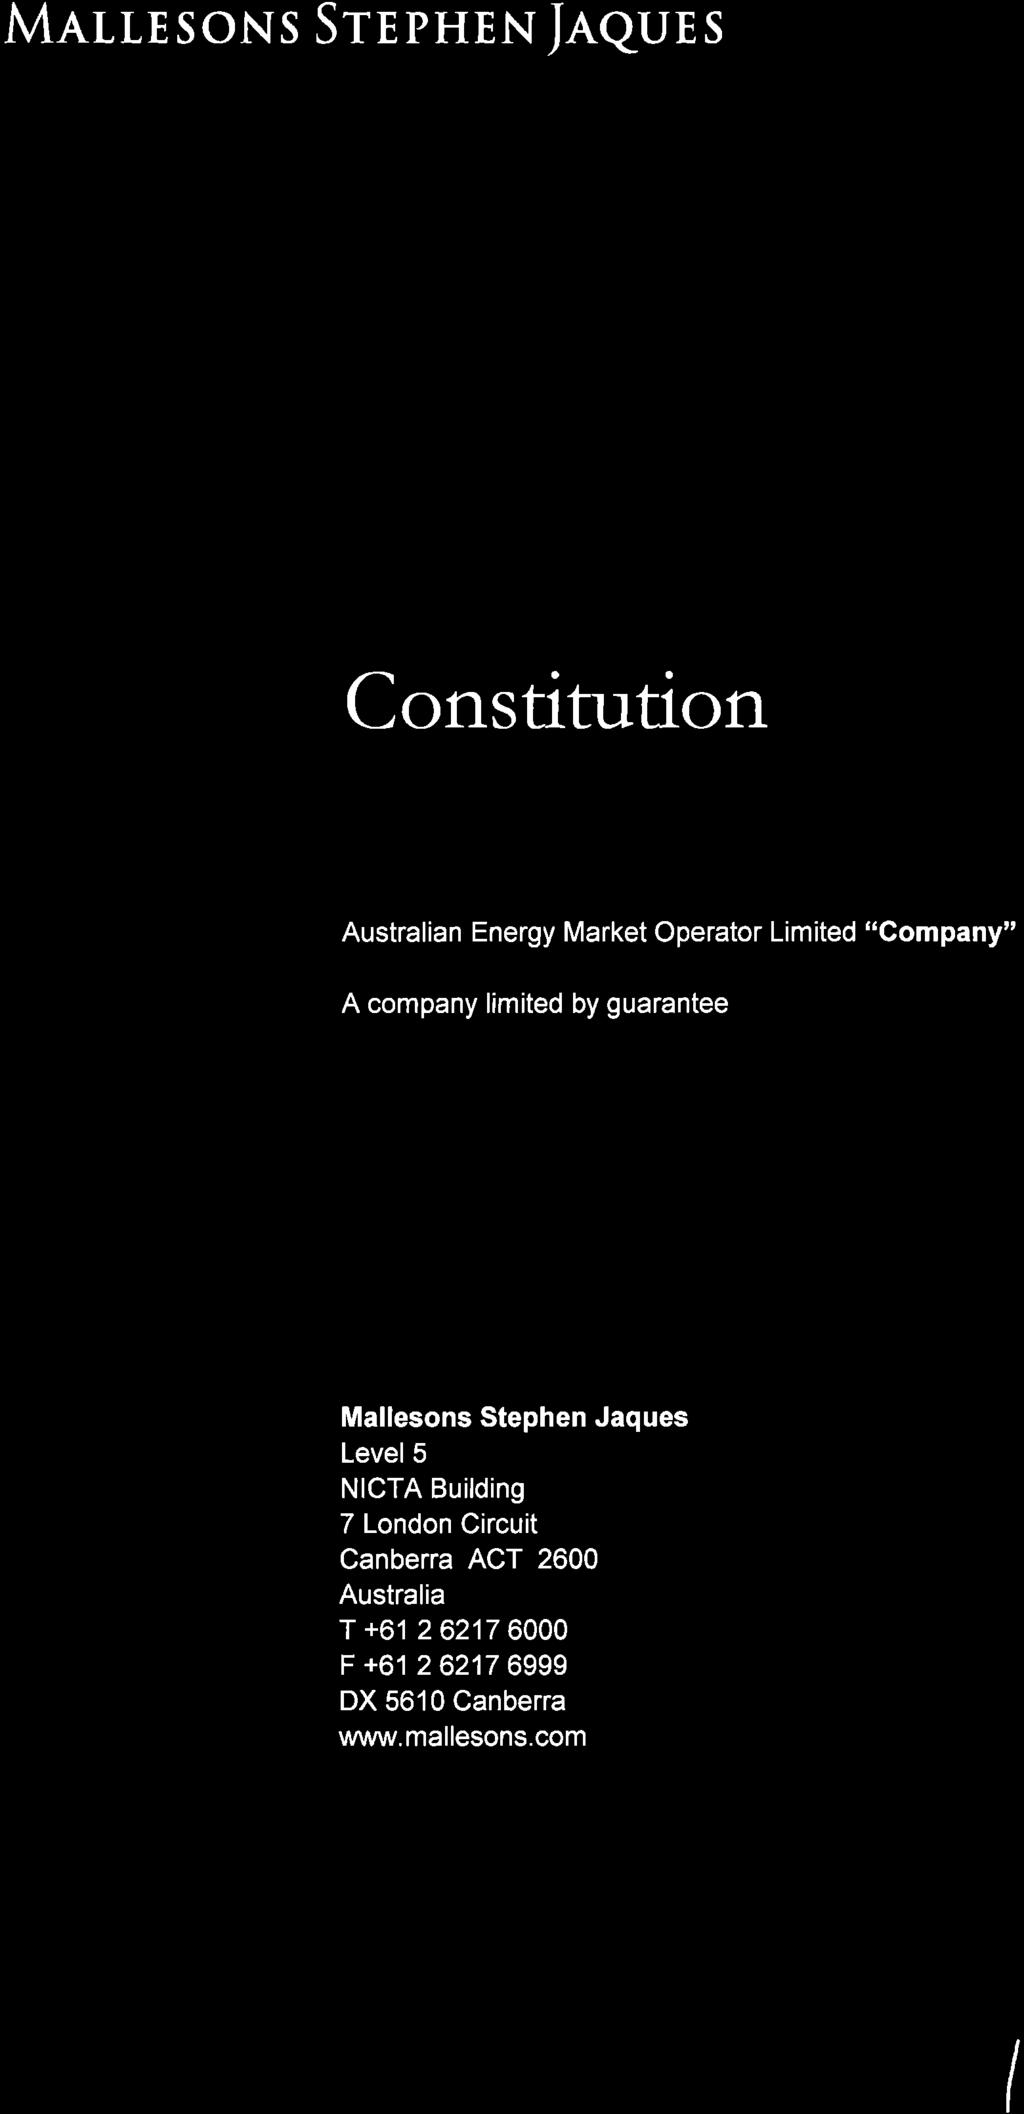 MALLE SONS STEPHEN JAQUES Constitution Australian Energy Market Operator Limited "Company" A company limited by guarantee Mallesons Stephen